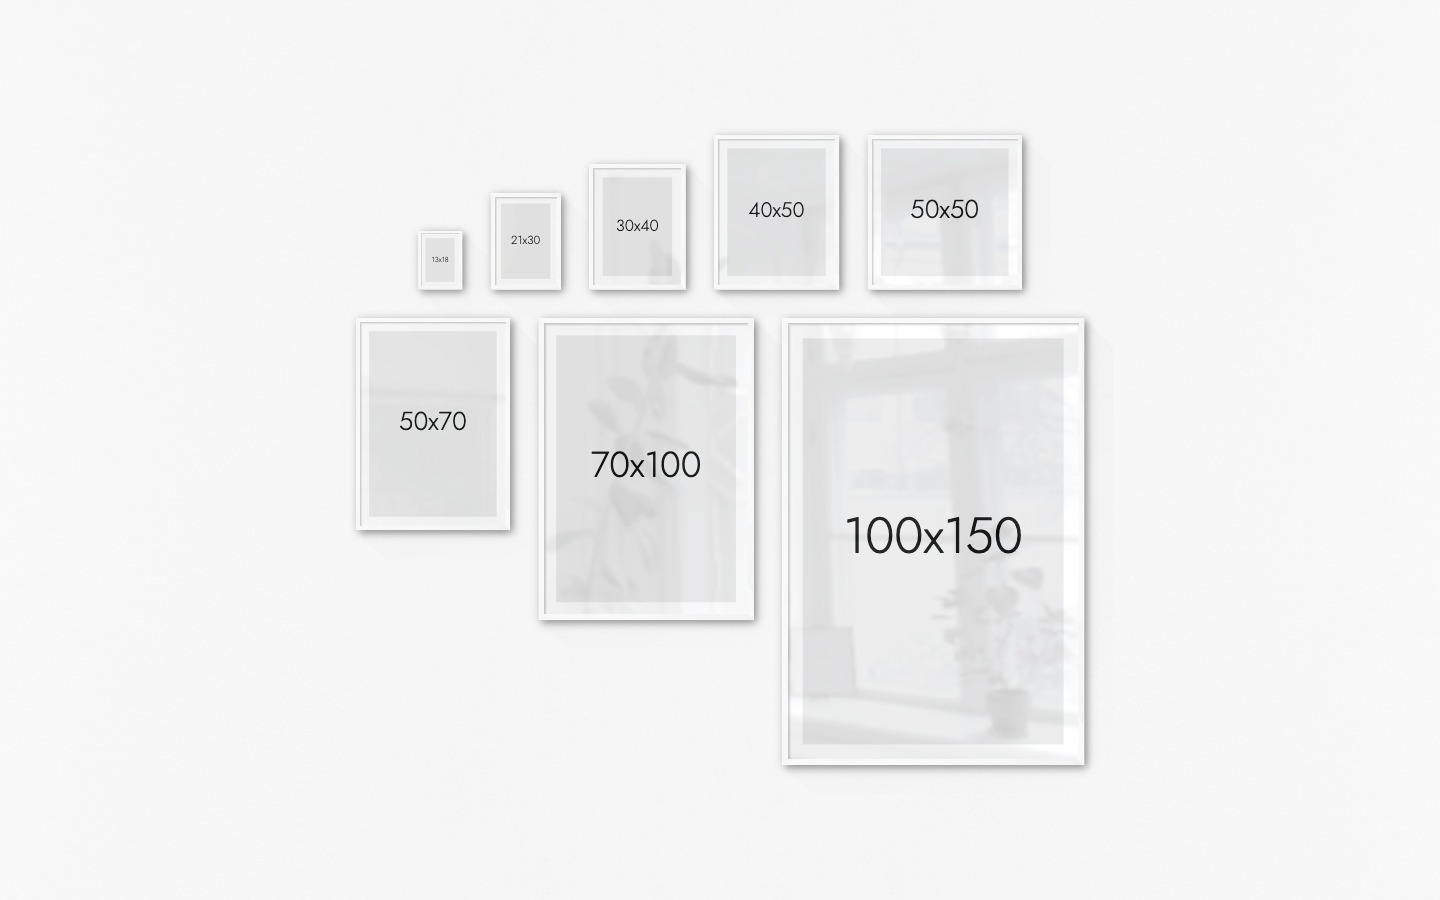 Gallery wall with picture frames in white in sizes 13x18, 21x30, 30x40, 40x50, 50x50, 50x70, 70x100 and 100x150